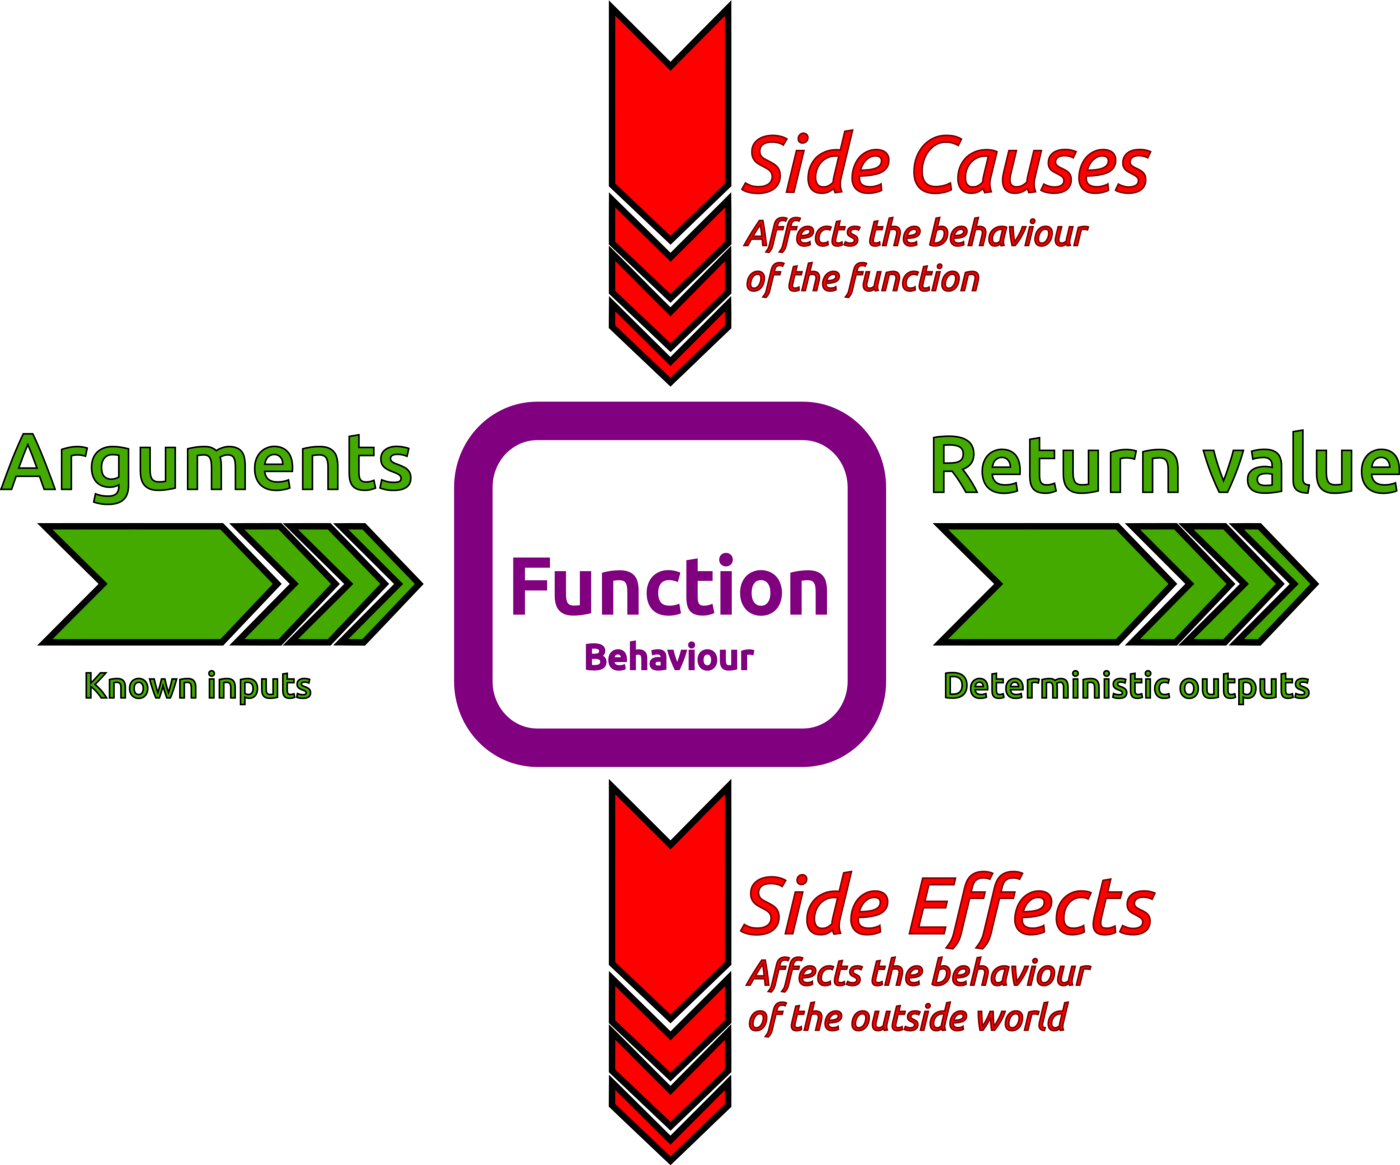 Side causes and side effects